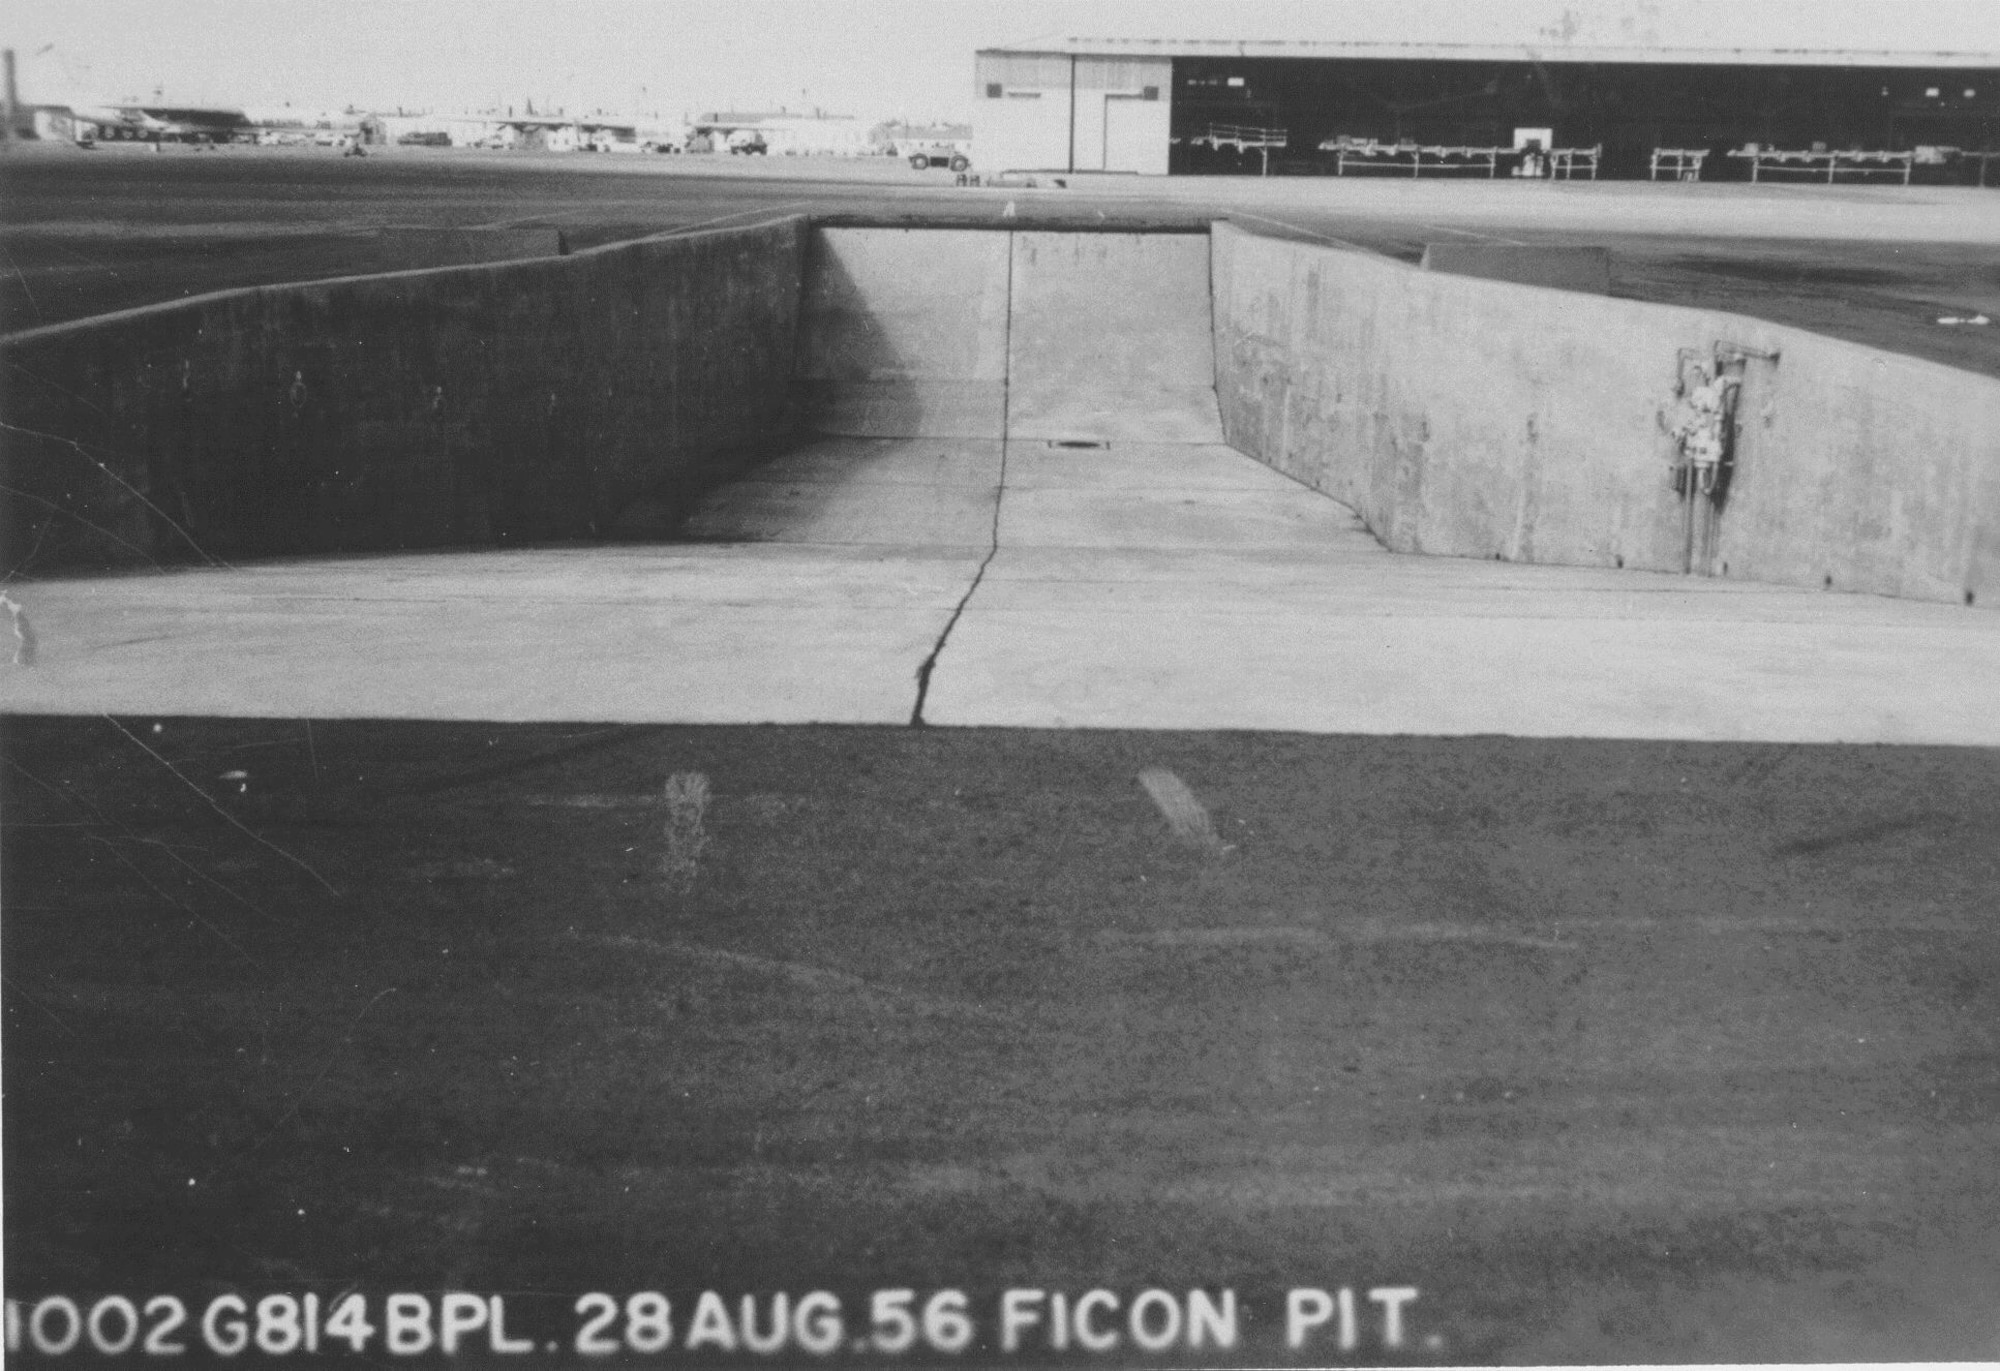 FICON Loading Pit. The $55,000 pit was 142 feet long, 50 feet wide and 12 feet deep. (U.S. Air Force photo)